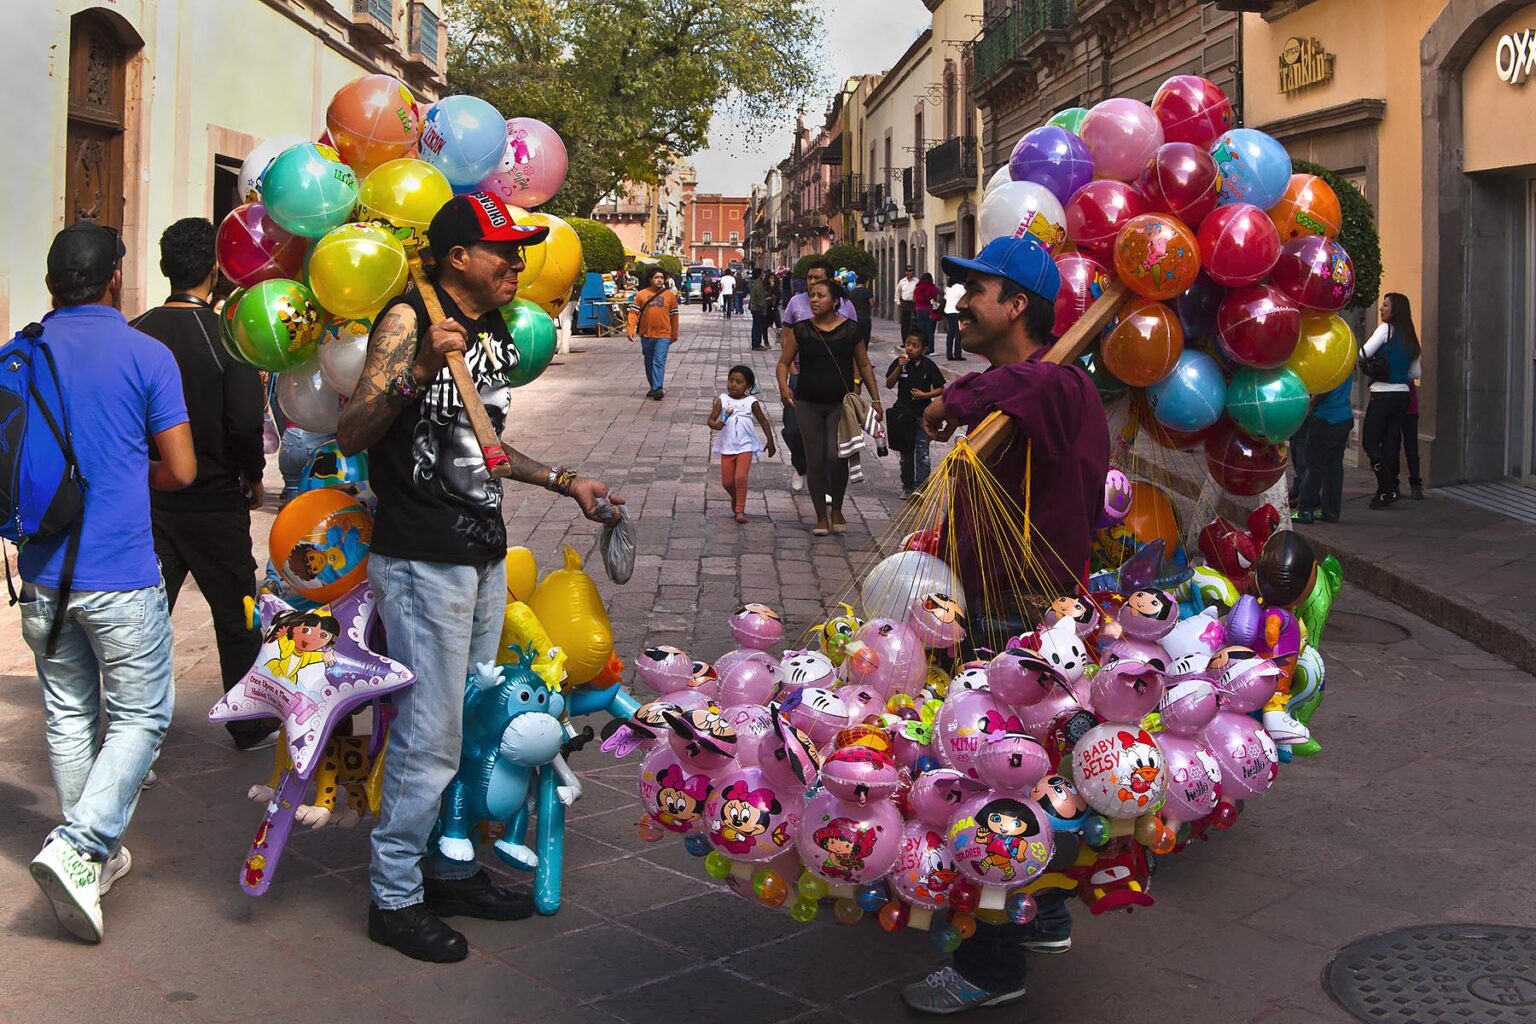 Balloon sellers in the historical center of the city of QUERETERO - MEXICO